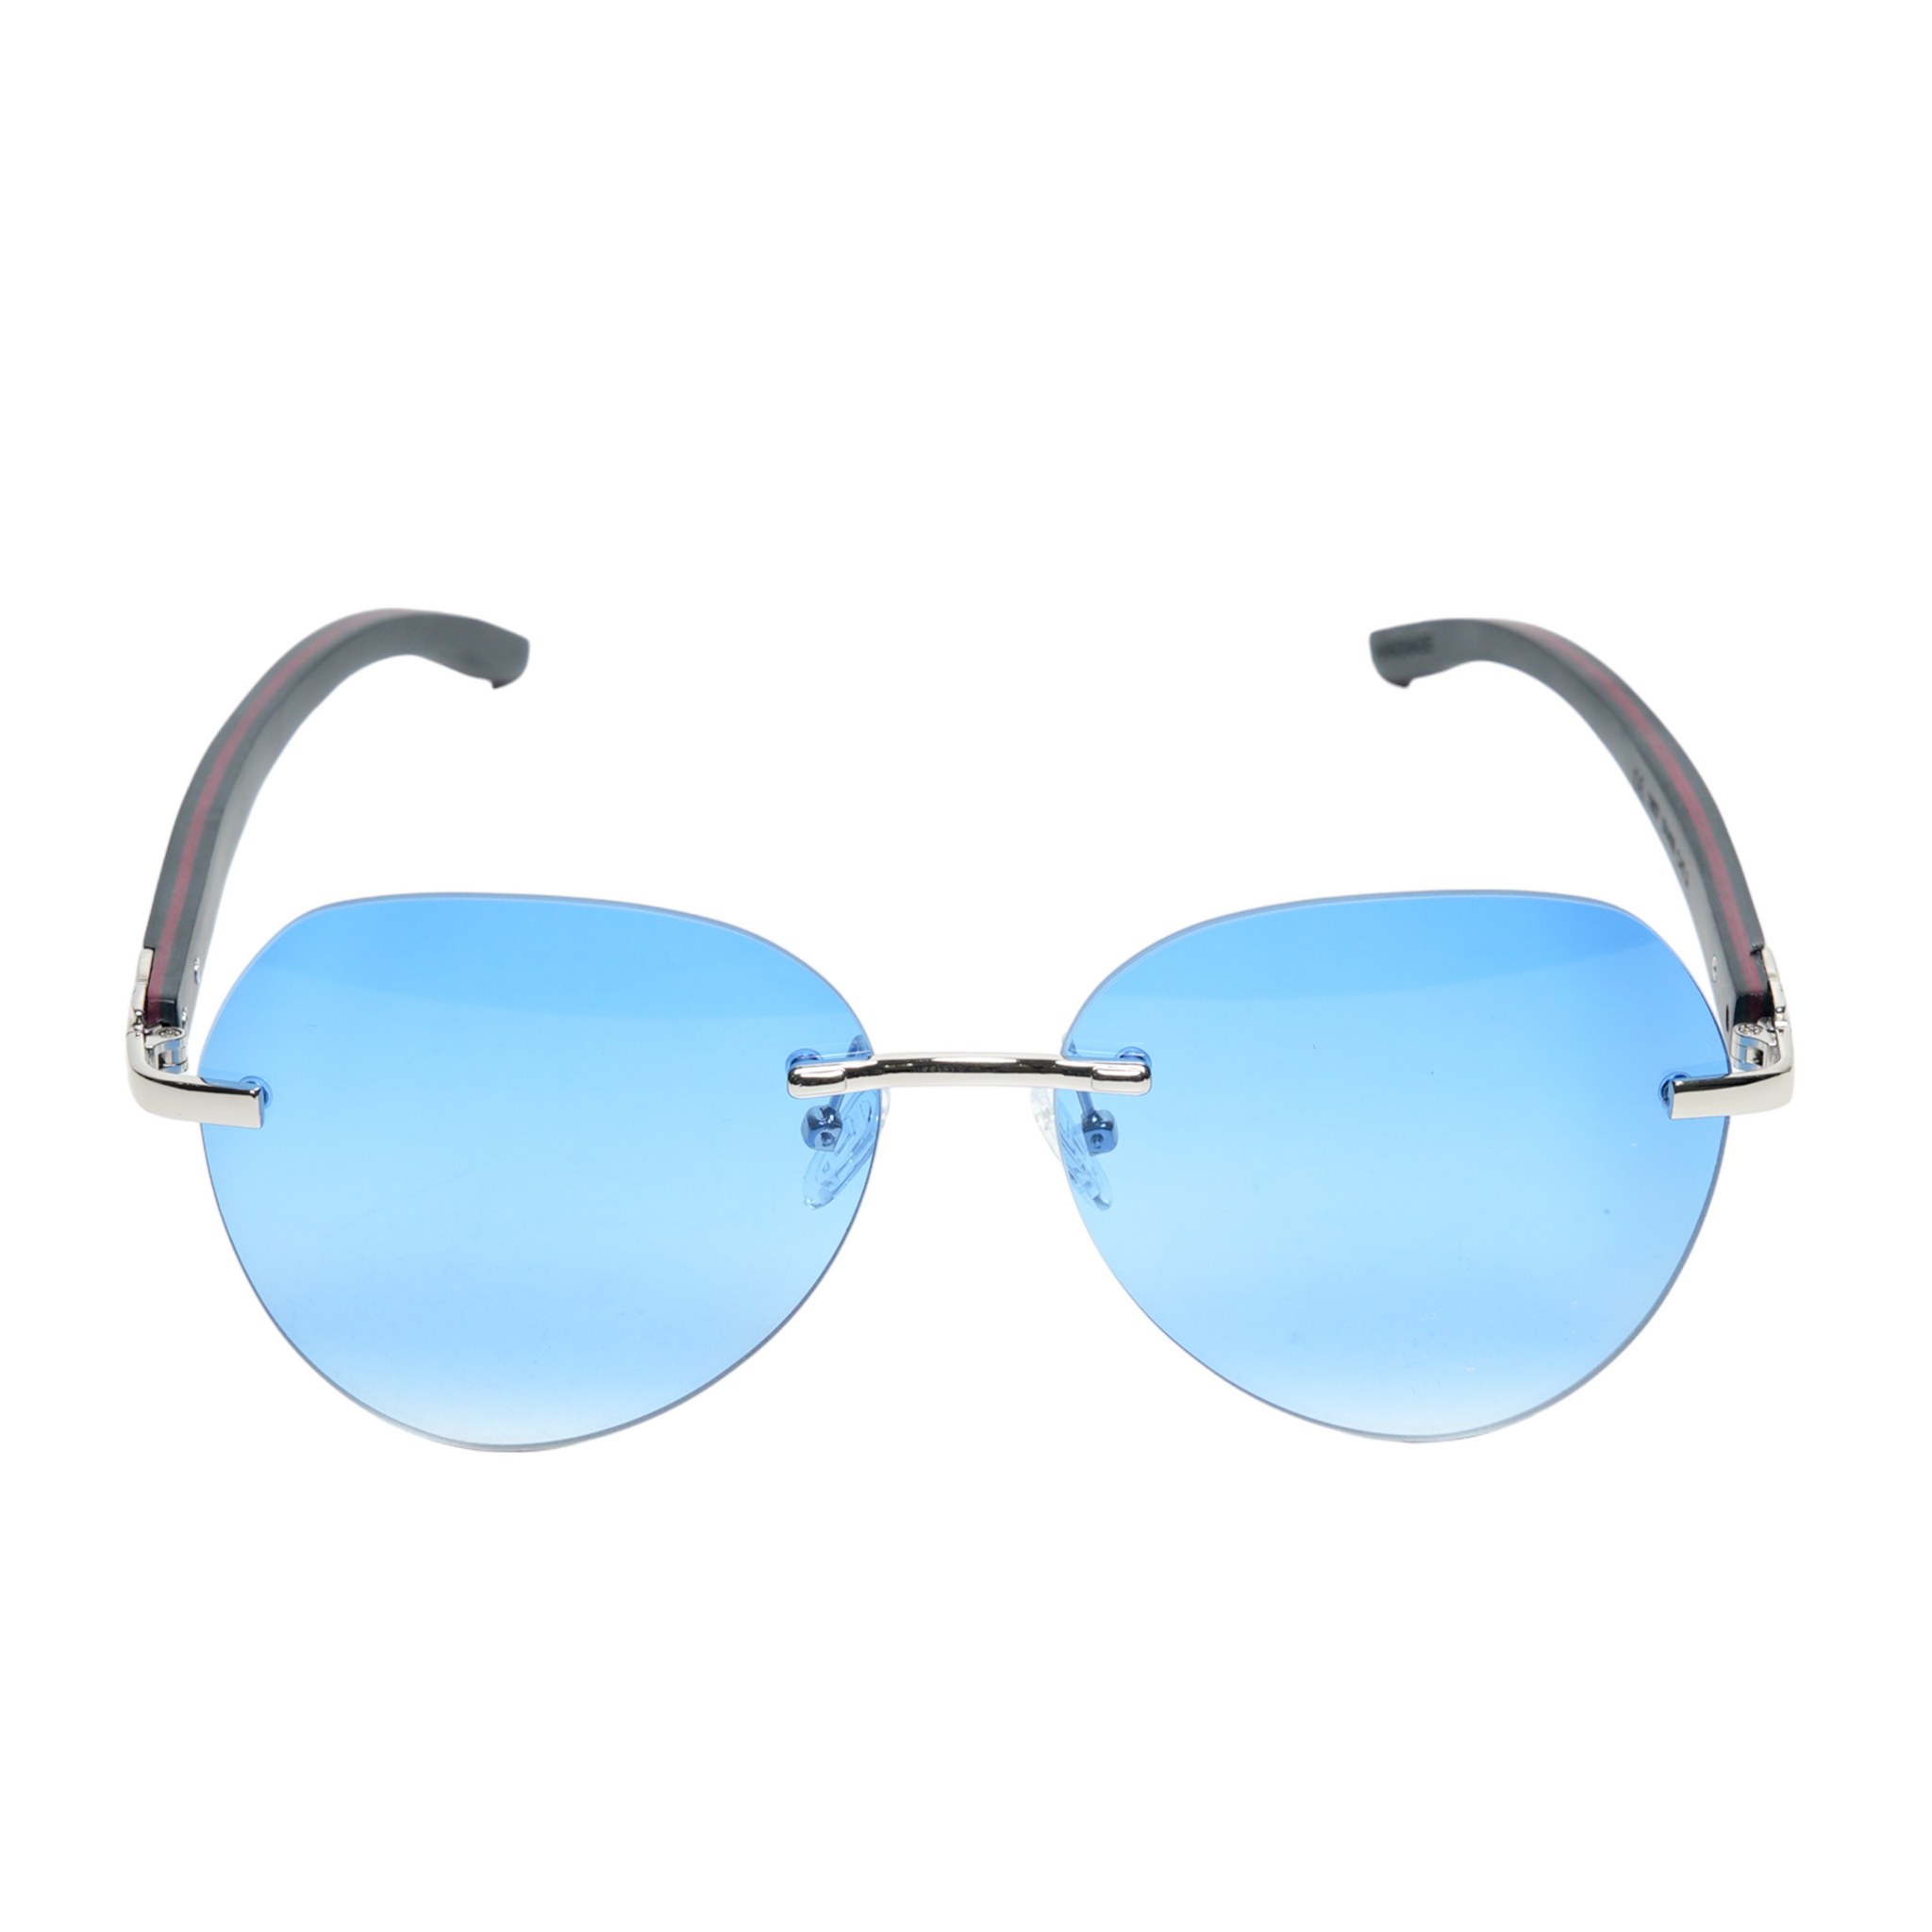 Chokore Rimless Oversized Sunglasses with Wooden Temple (Blue)